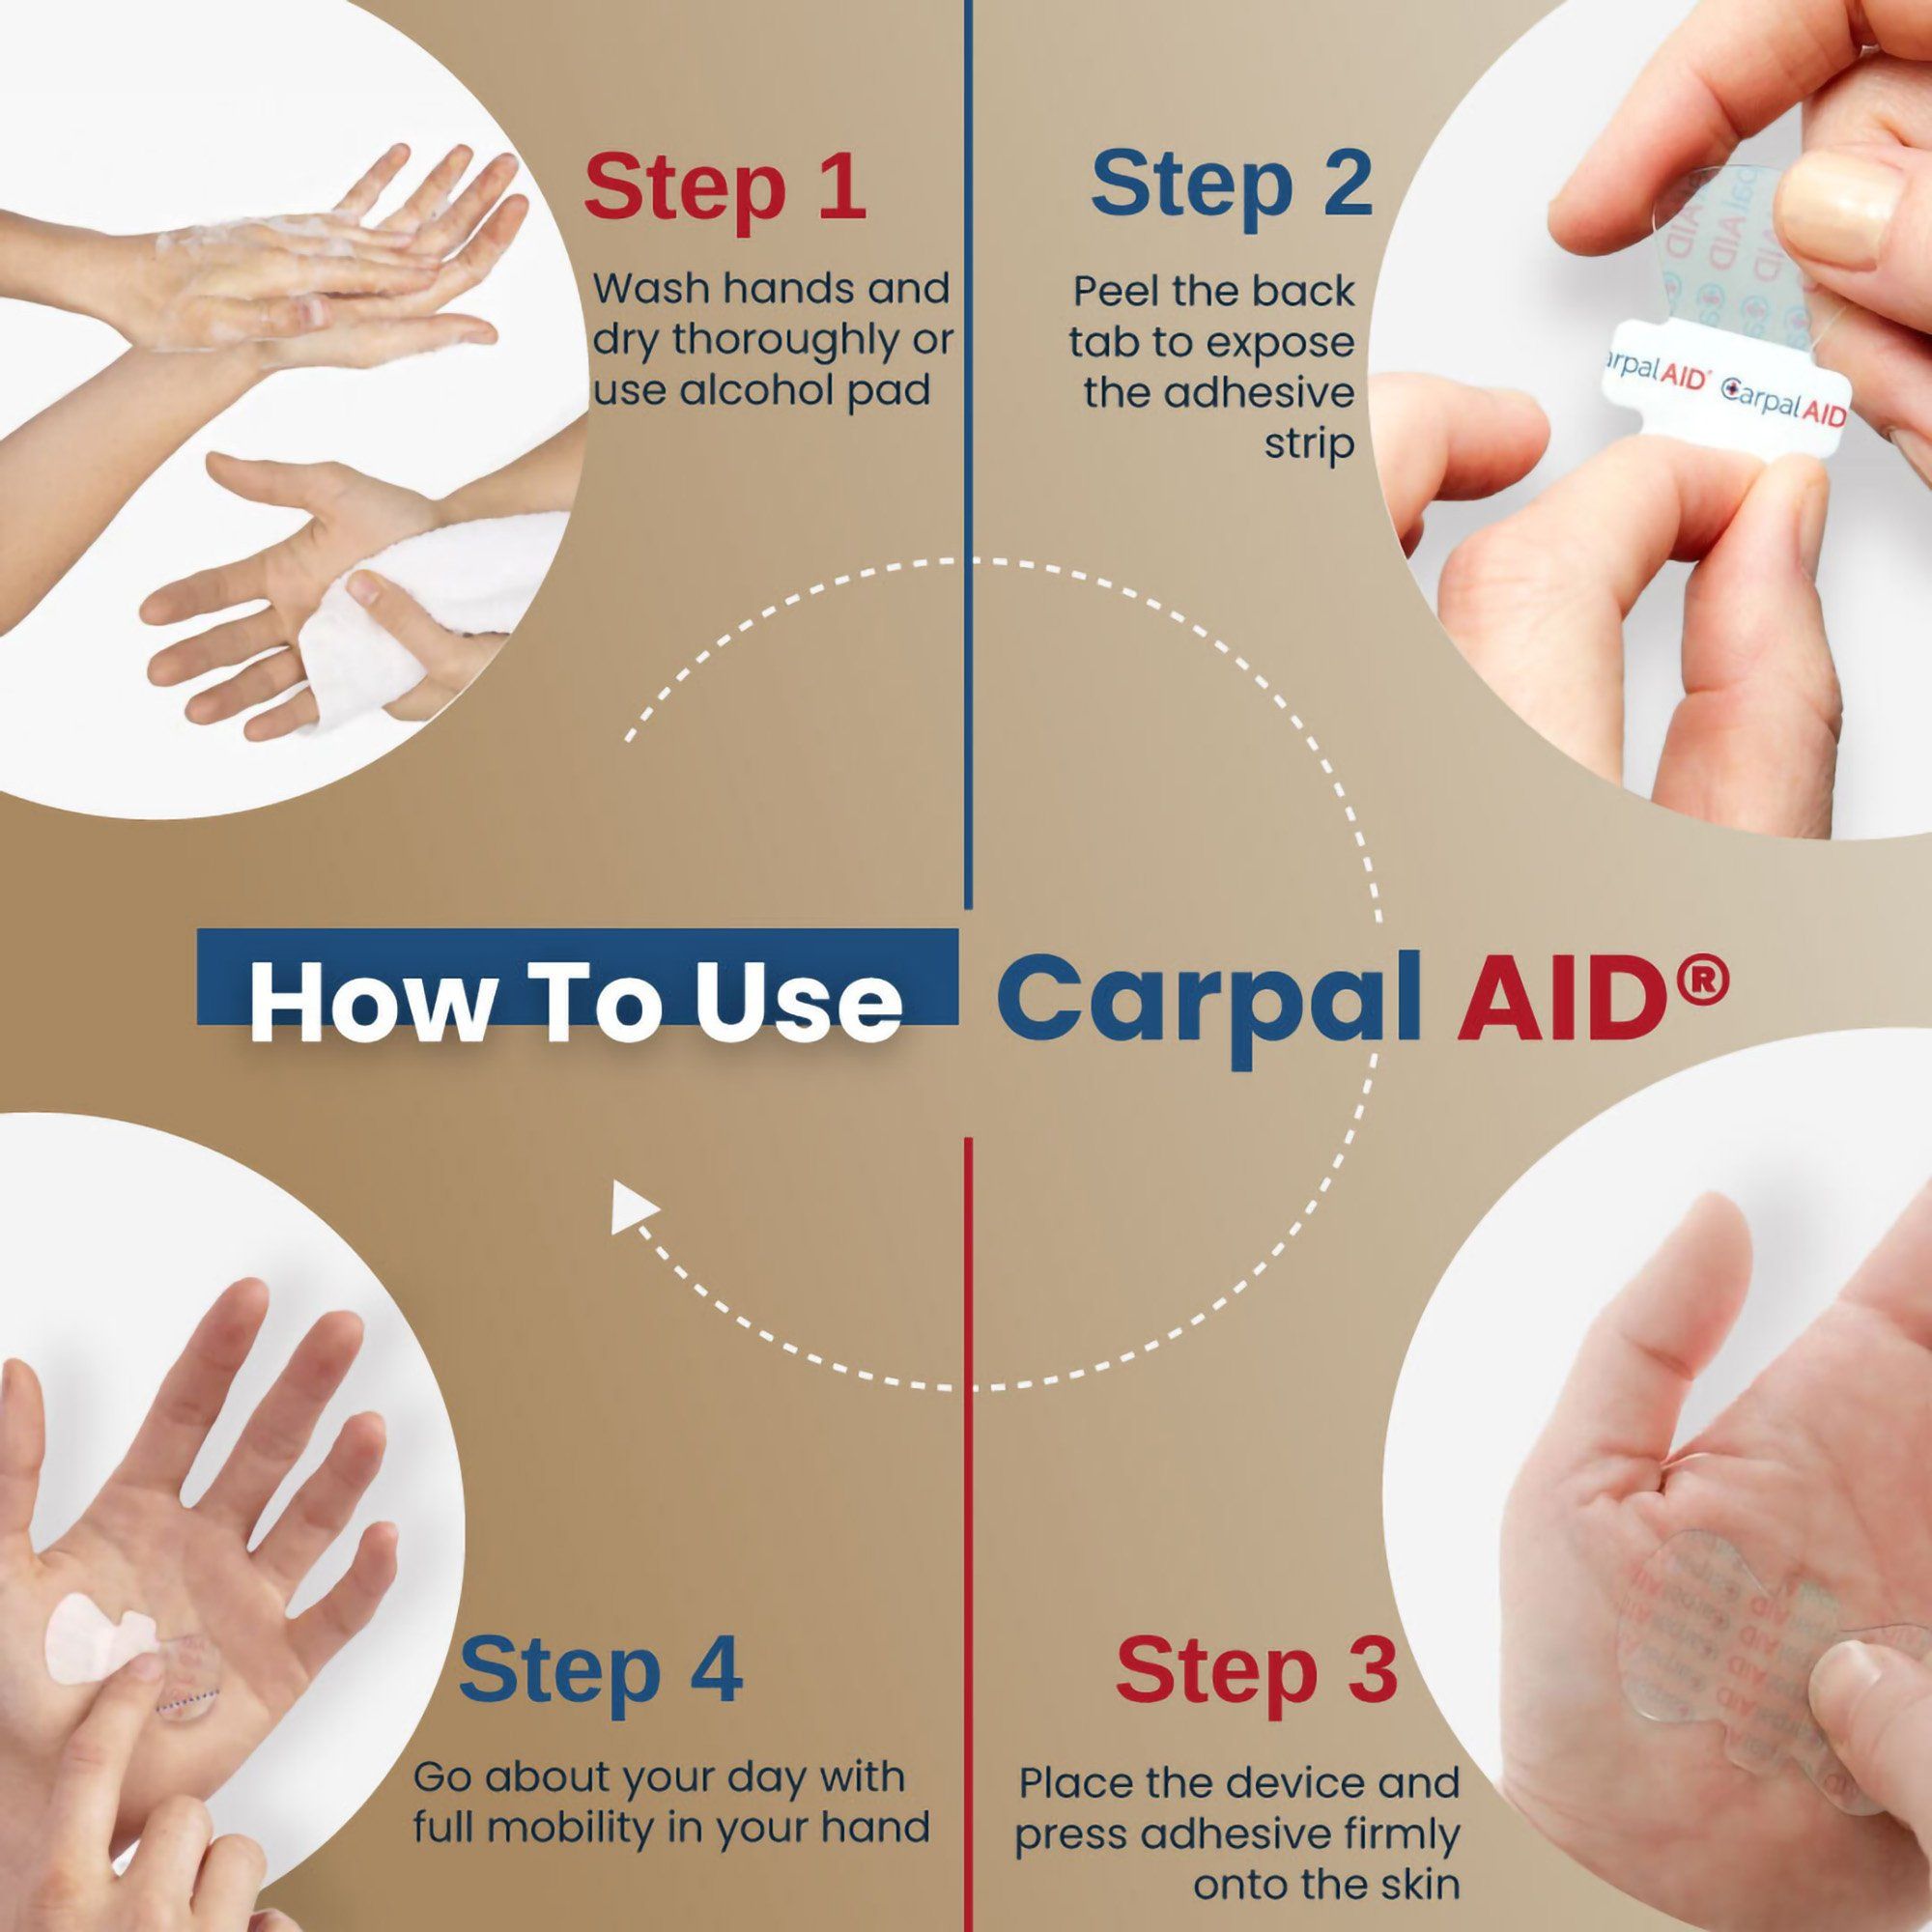 Carpal AID Clear Adhesive Hand-Based Carpal Tunnel Support Patches, Universal -  One Size Fits Most - 6 ct